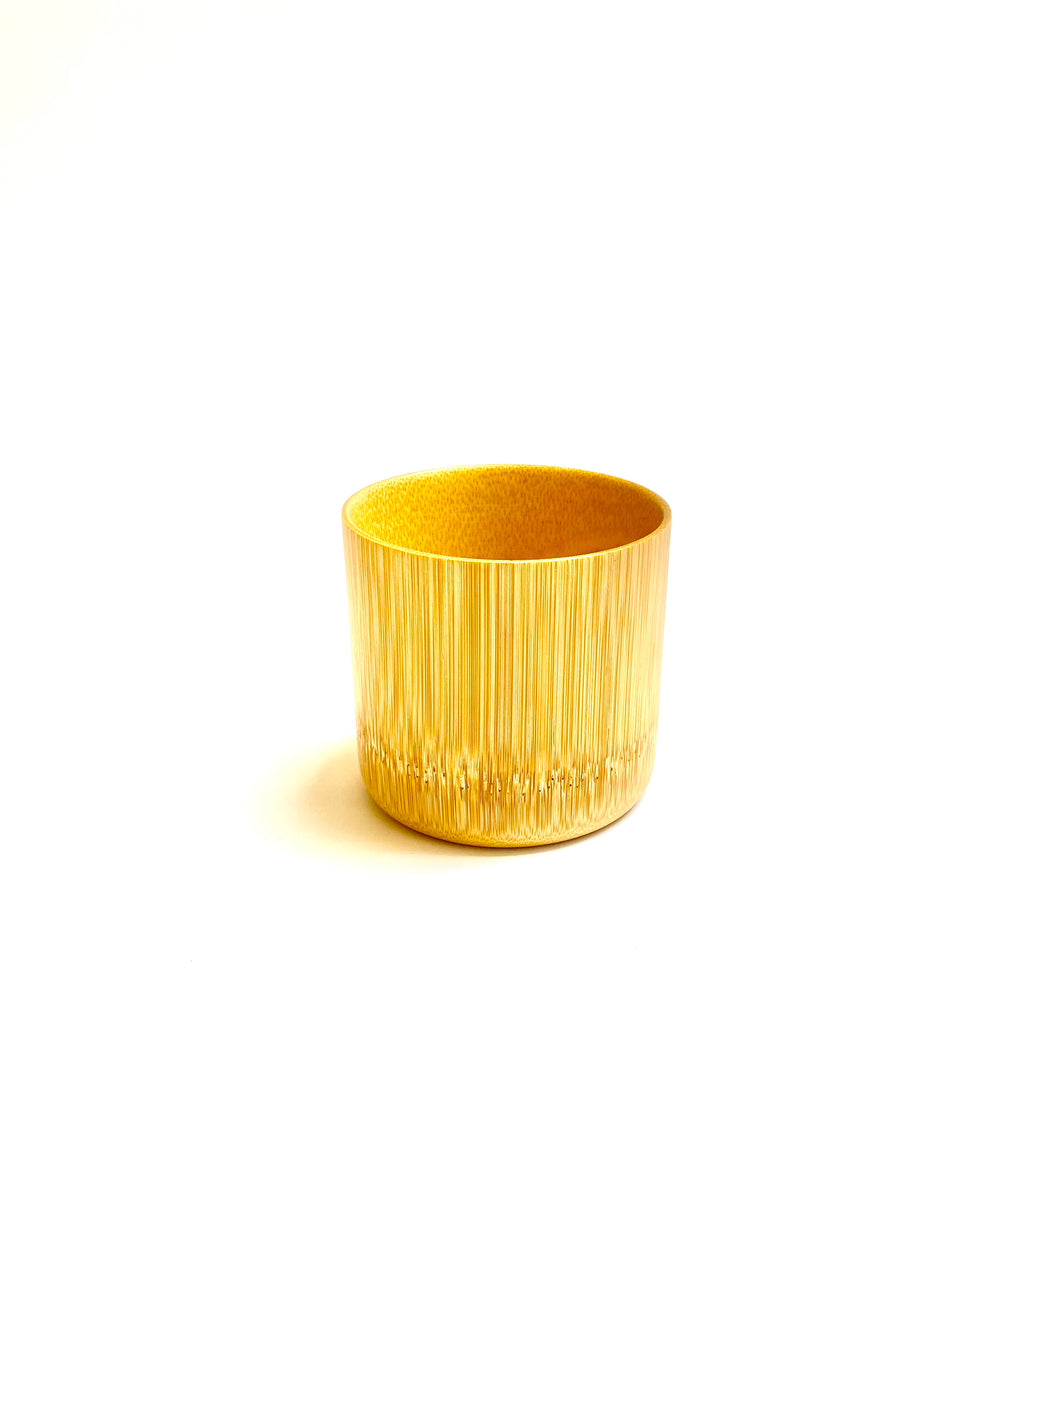 Japanese bamboo cup